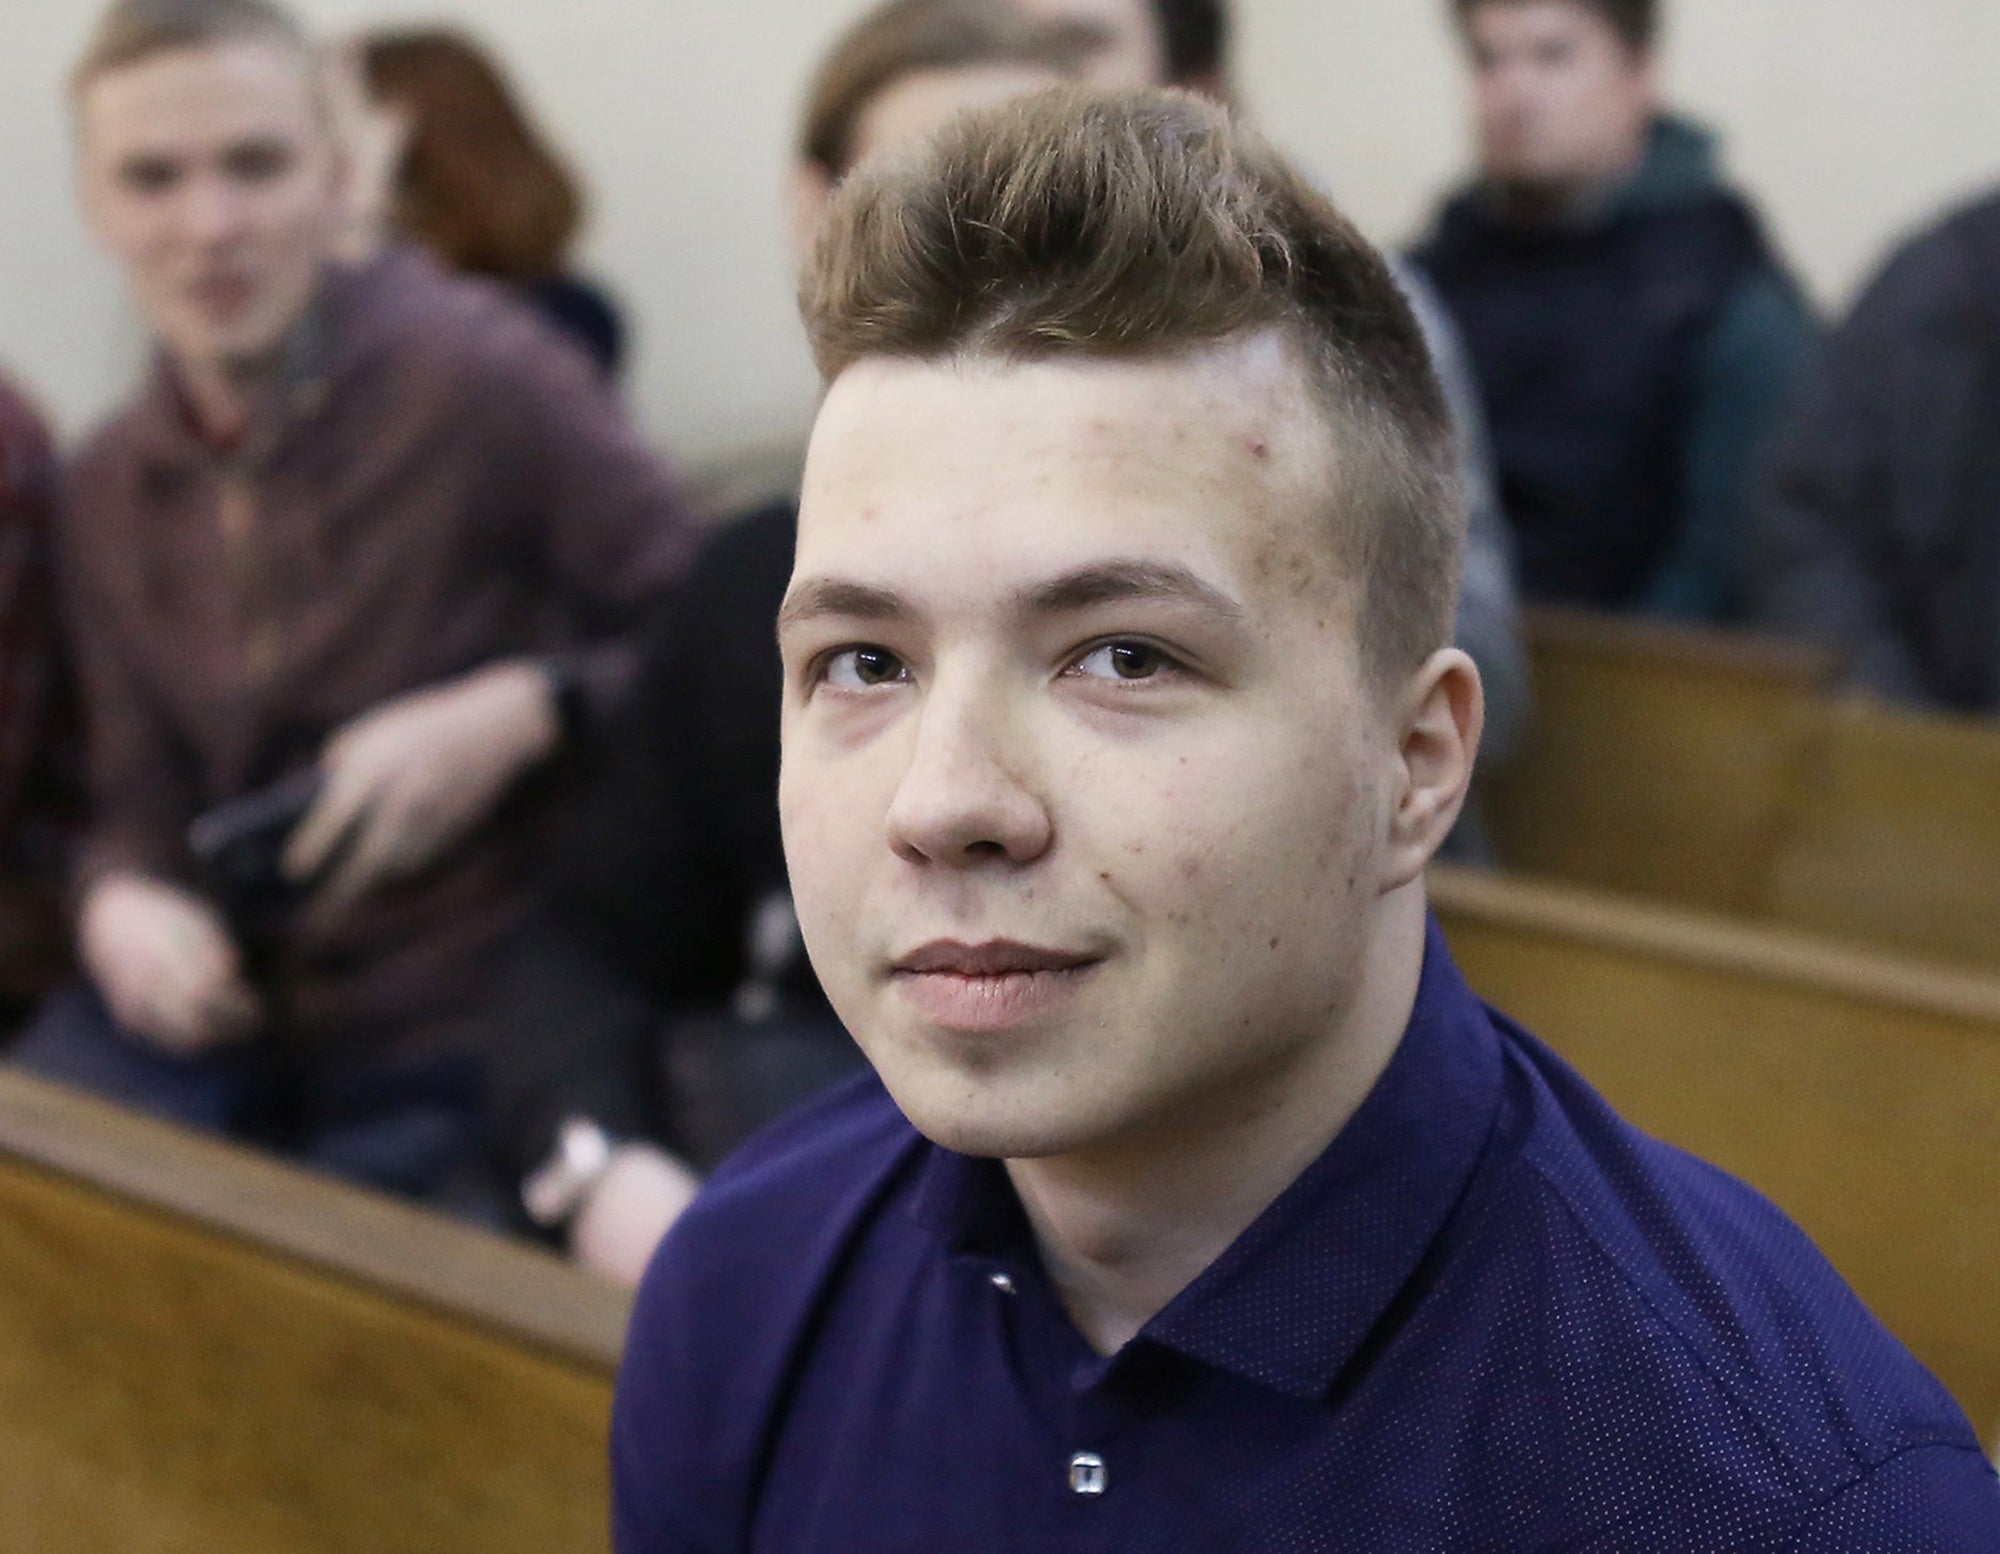 Opposition blogger and activist Roman Protasevich